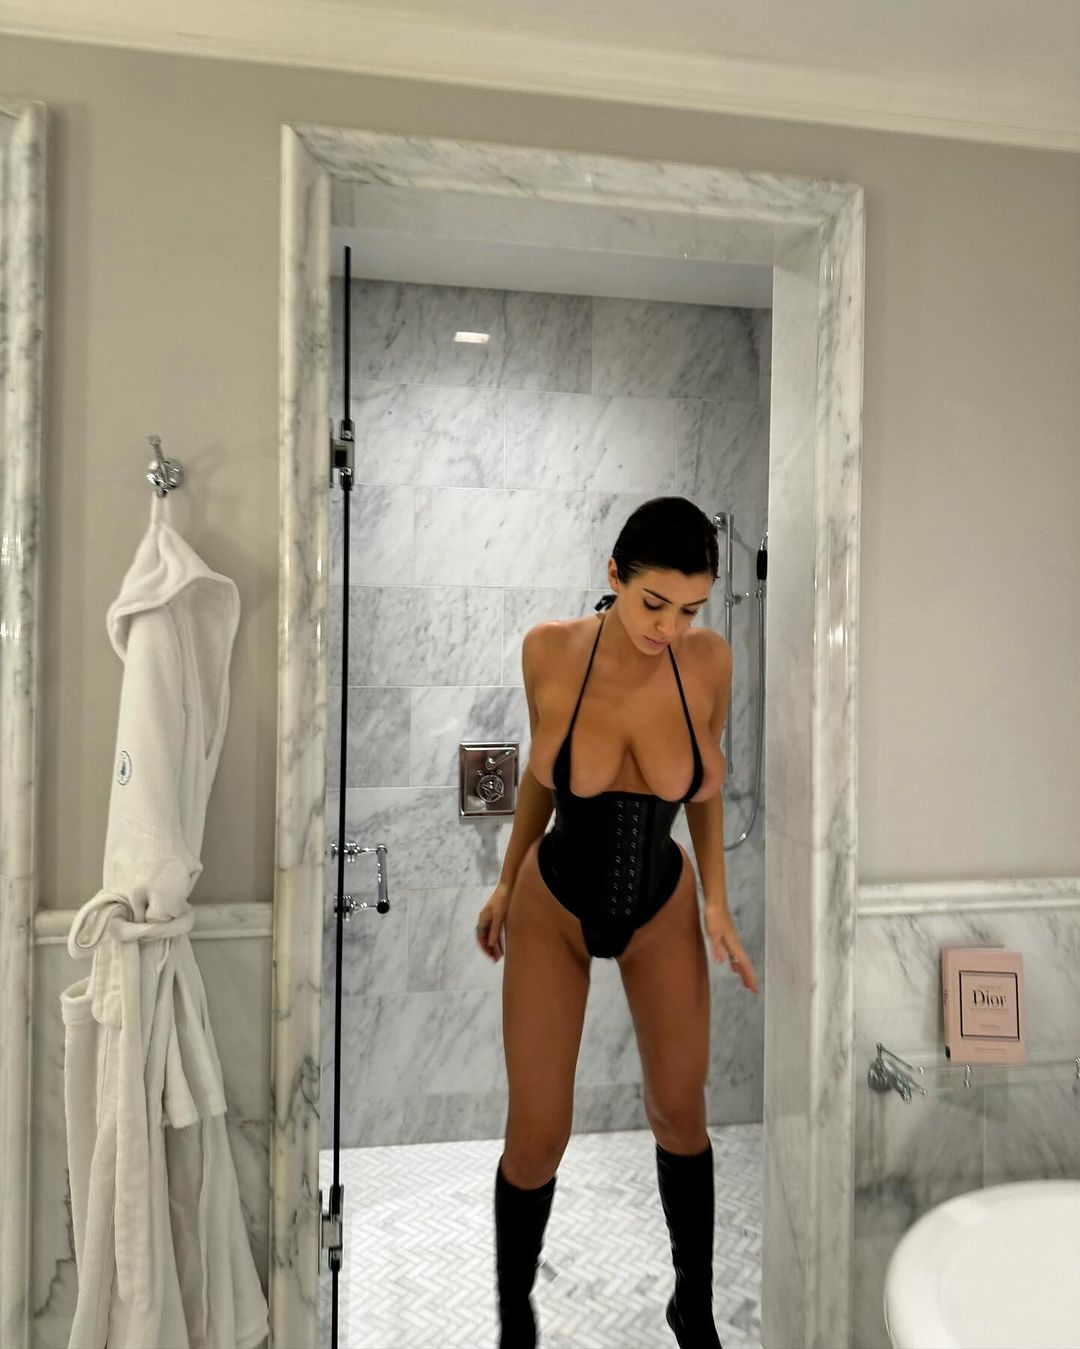 Kanye West shares raunchy photos to celebrate Wife